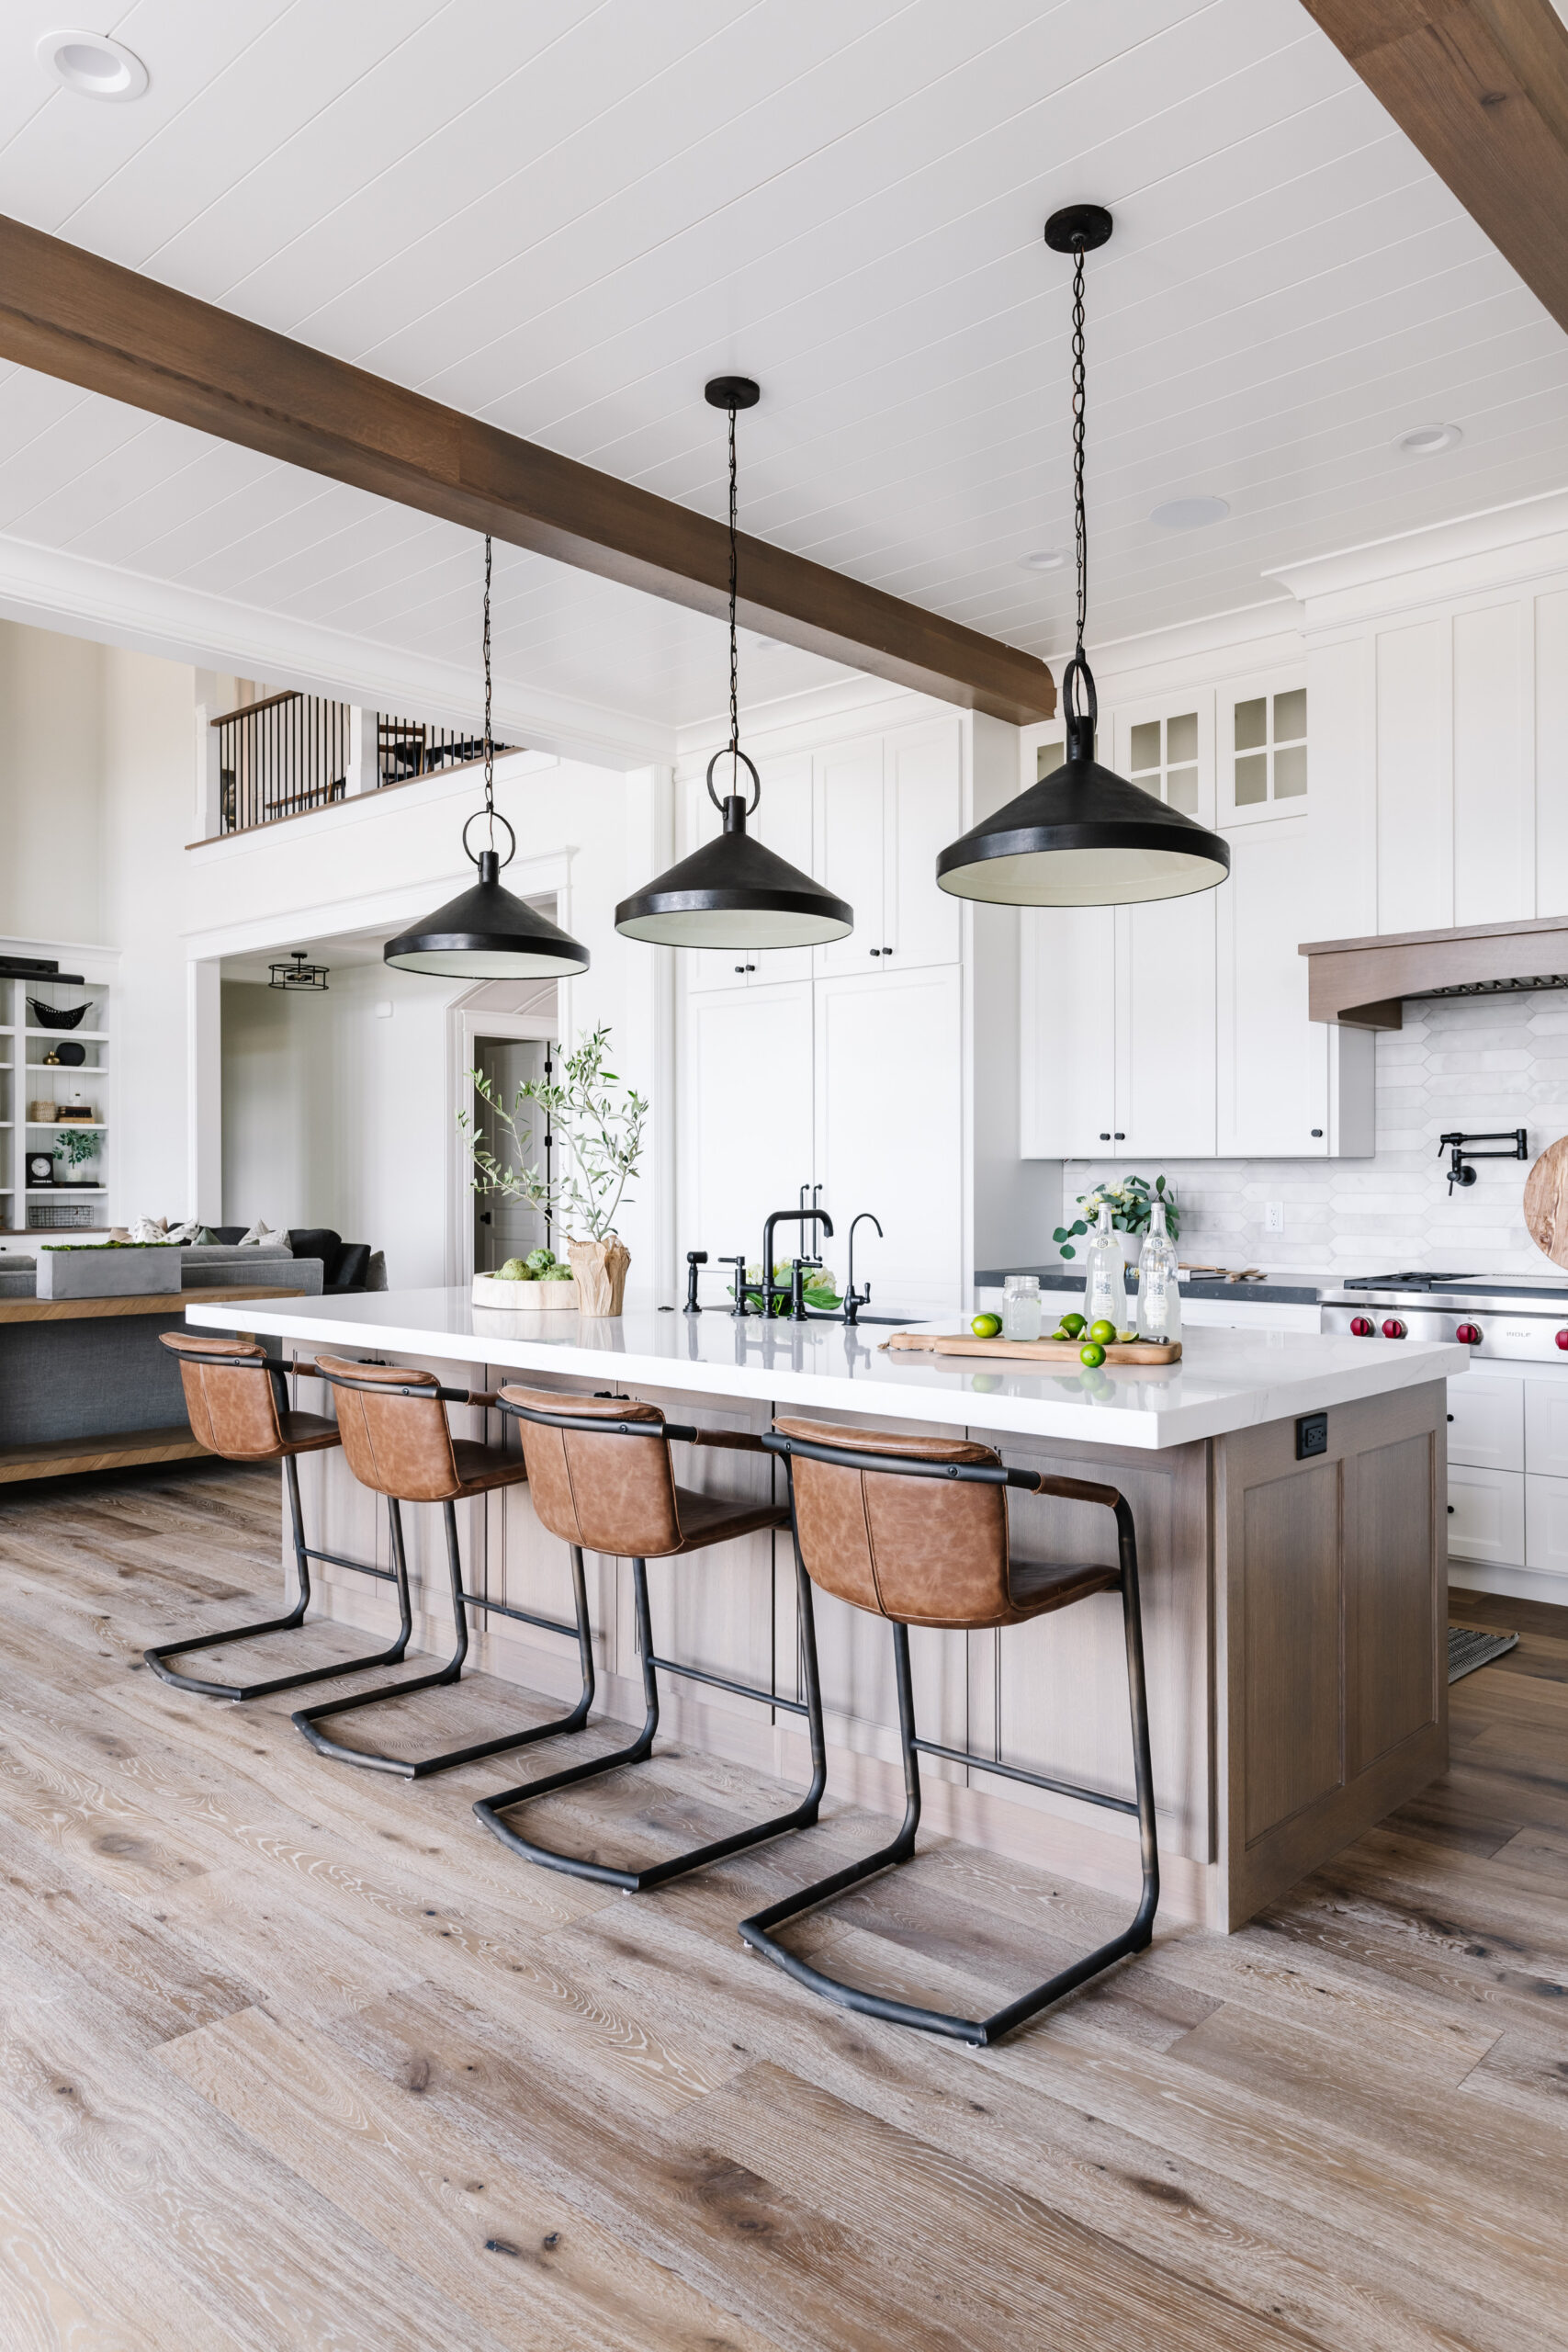 20 Modern Farmhouse Kitchens With Rustic Flare | A Blissful Nest